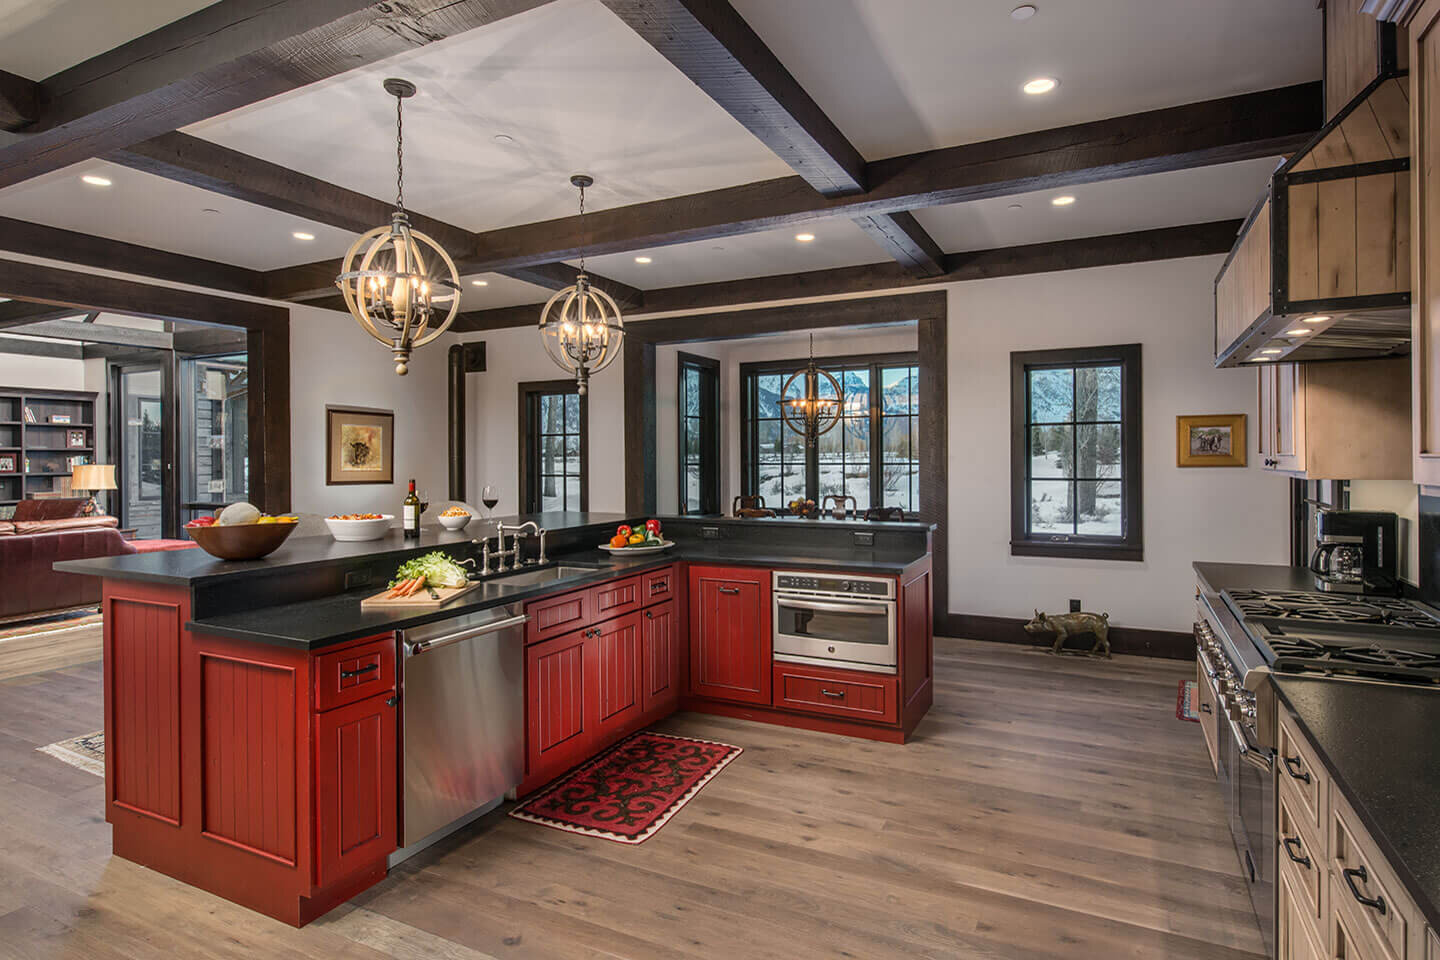 Kitchen with red center island and scrubbed oak flooring